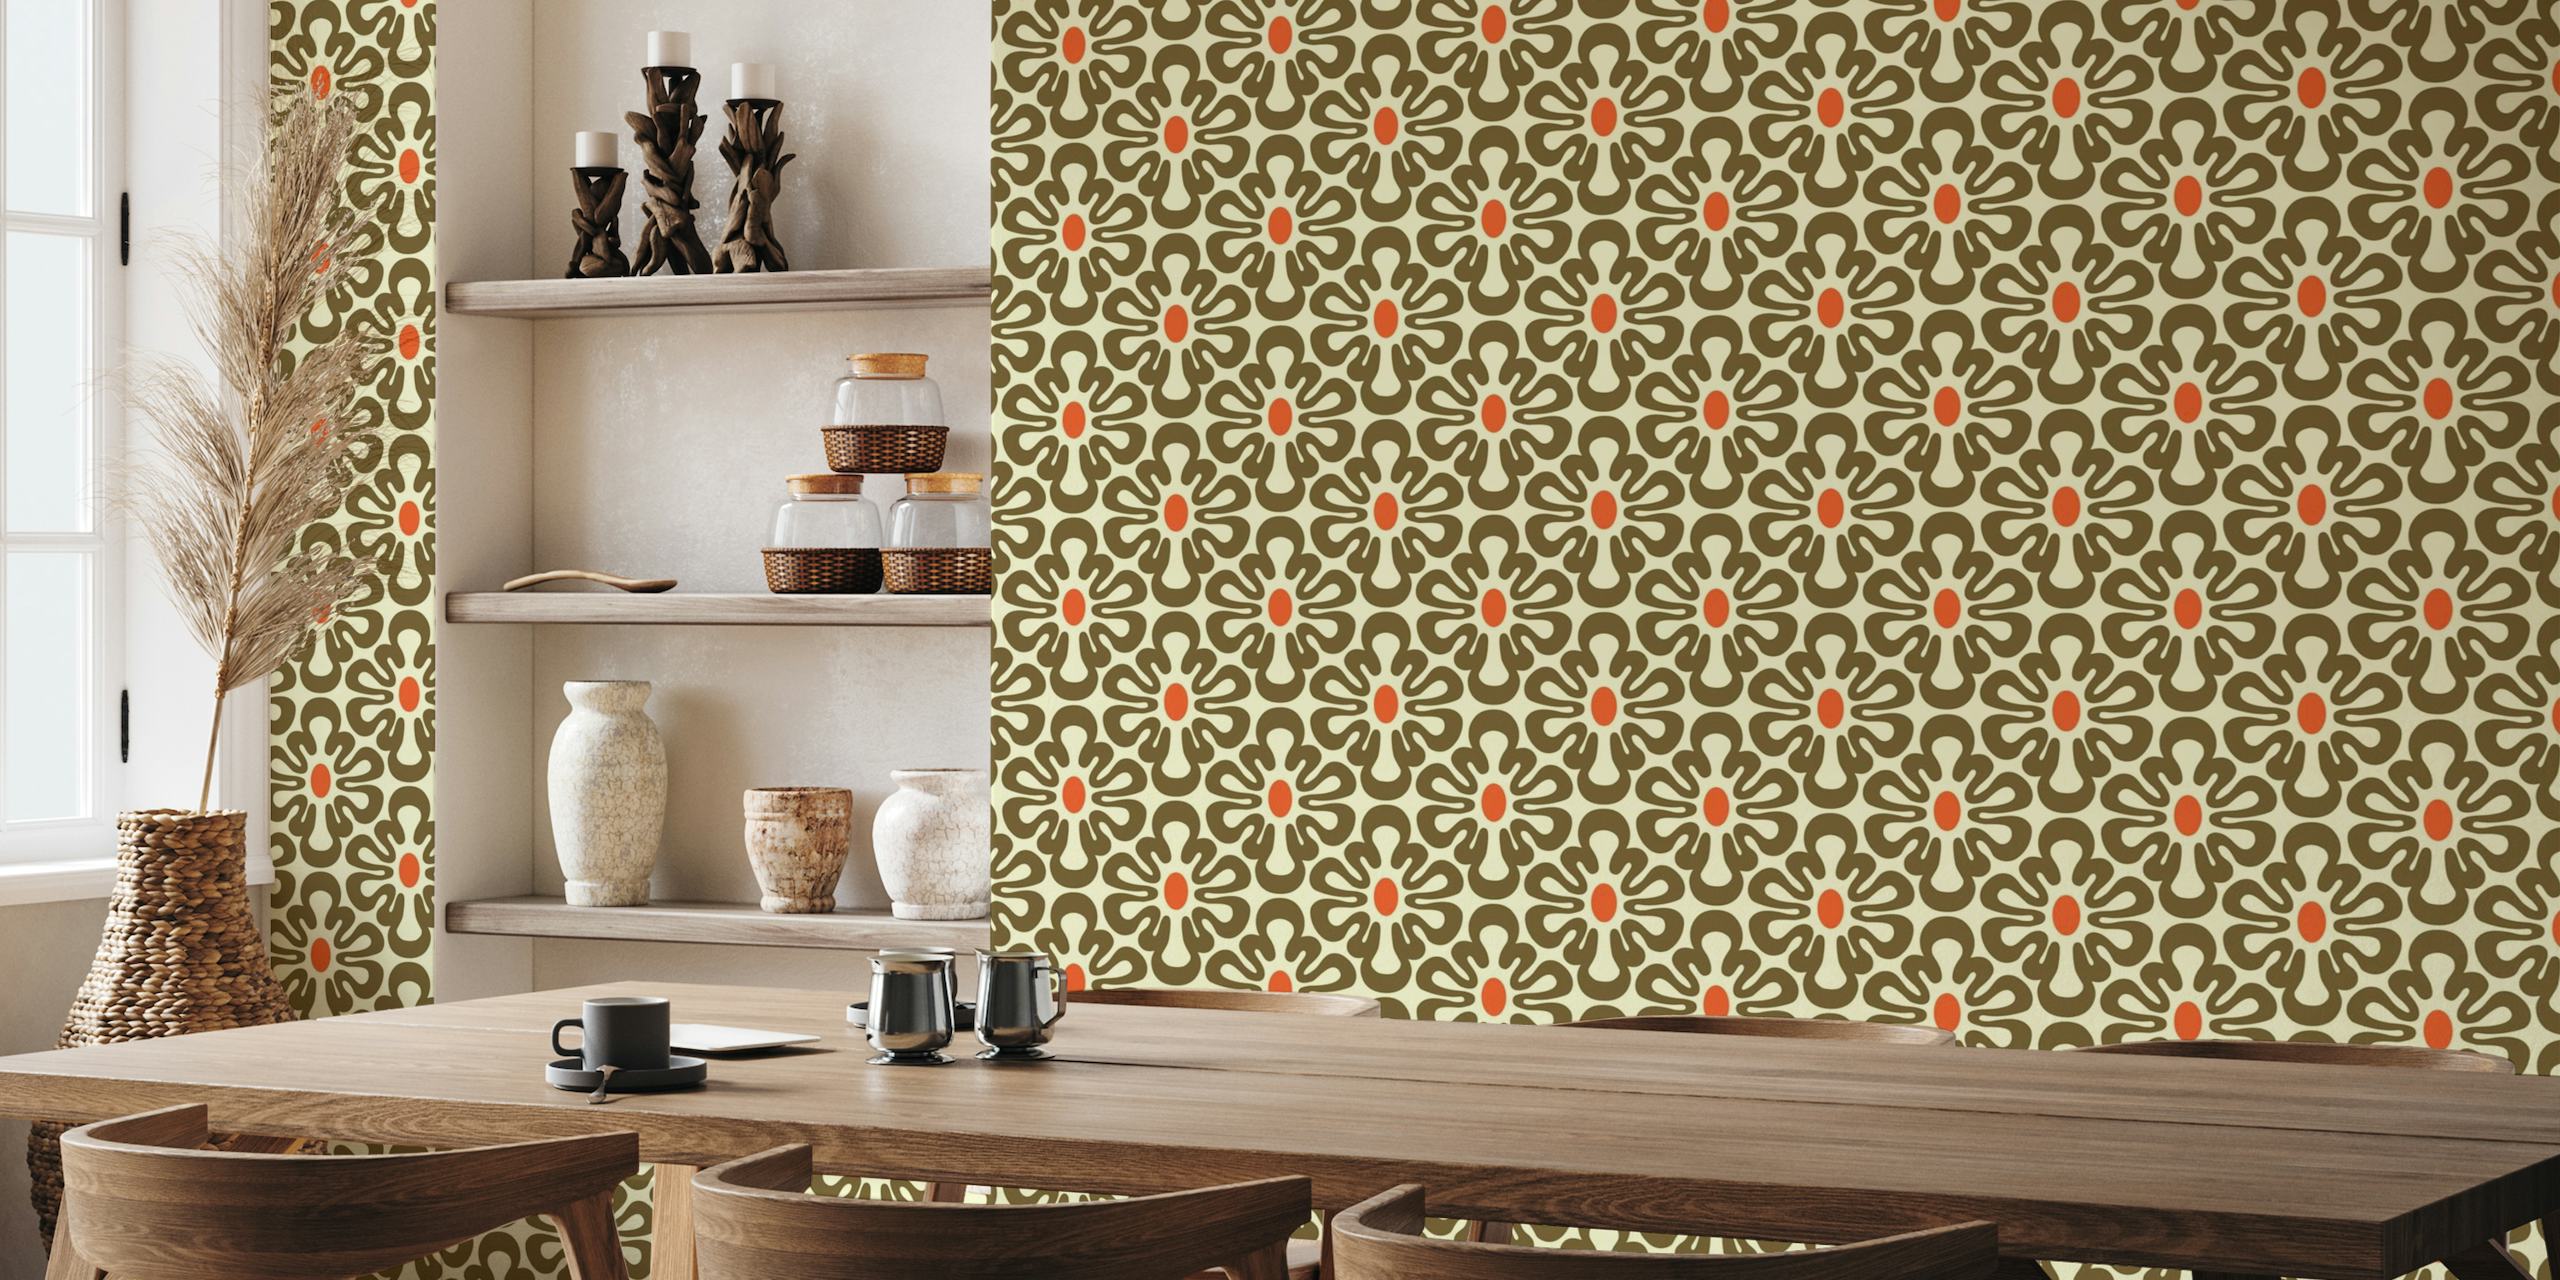 2625 A - abstract retro shapes pattern wallpaper